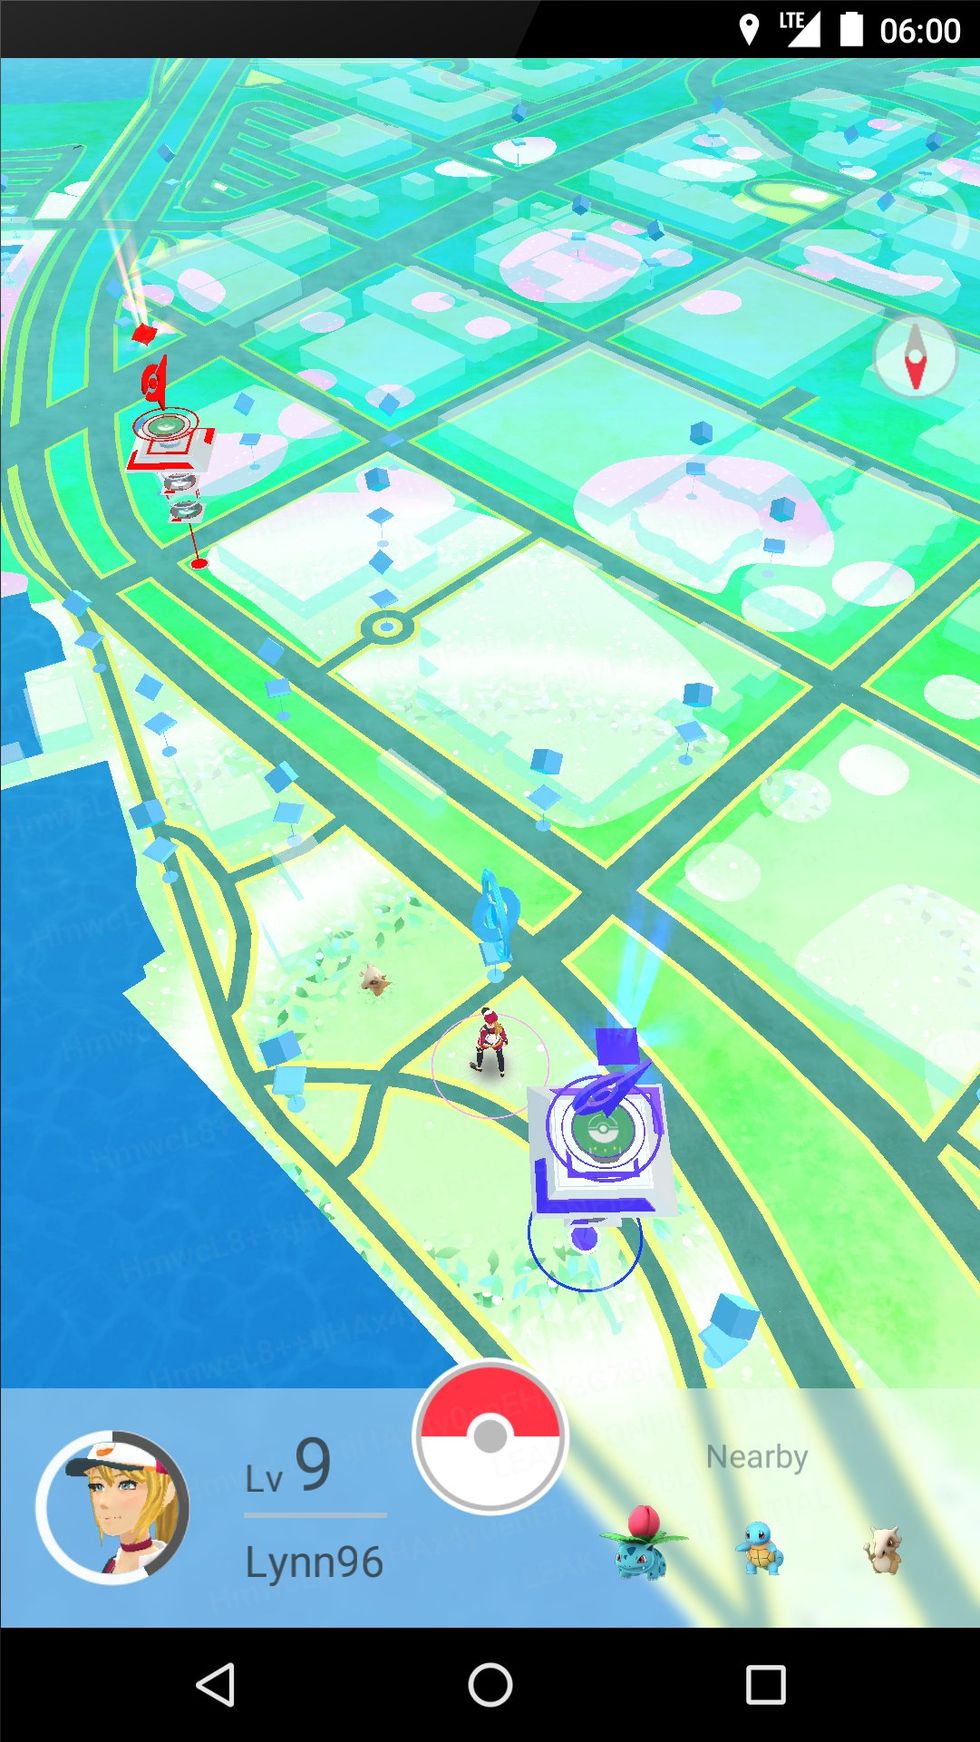 unofficial-map-pokemon-go (1) - Gadt Travel